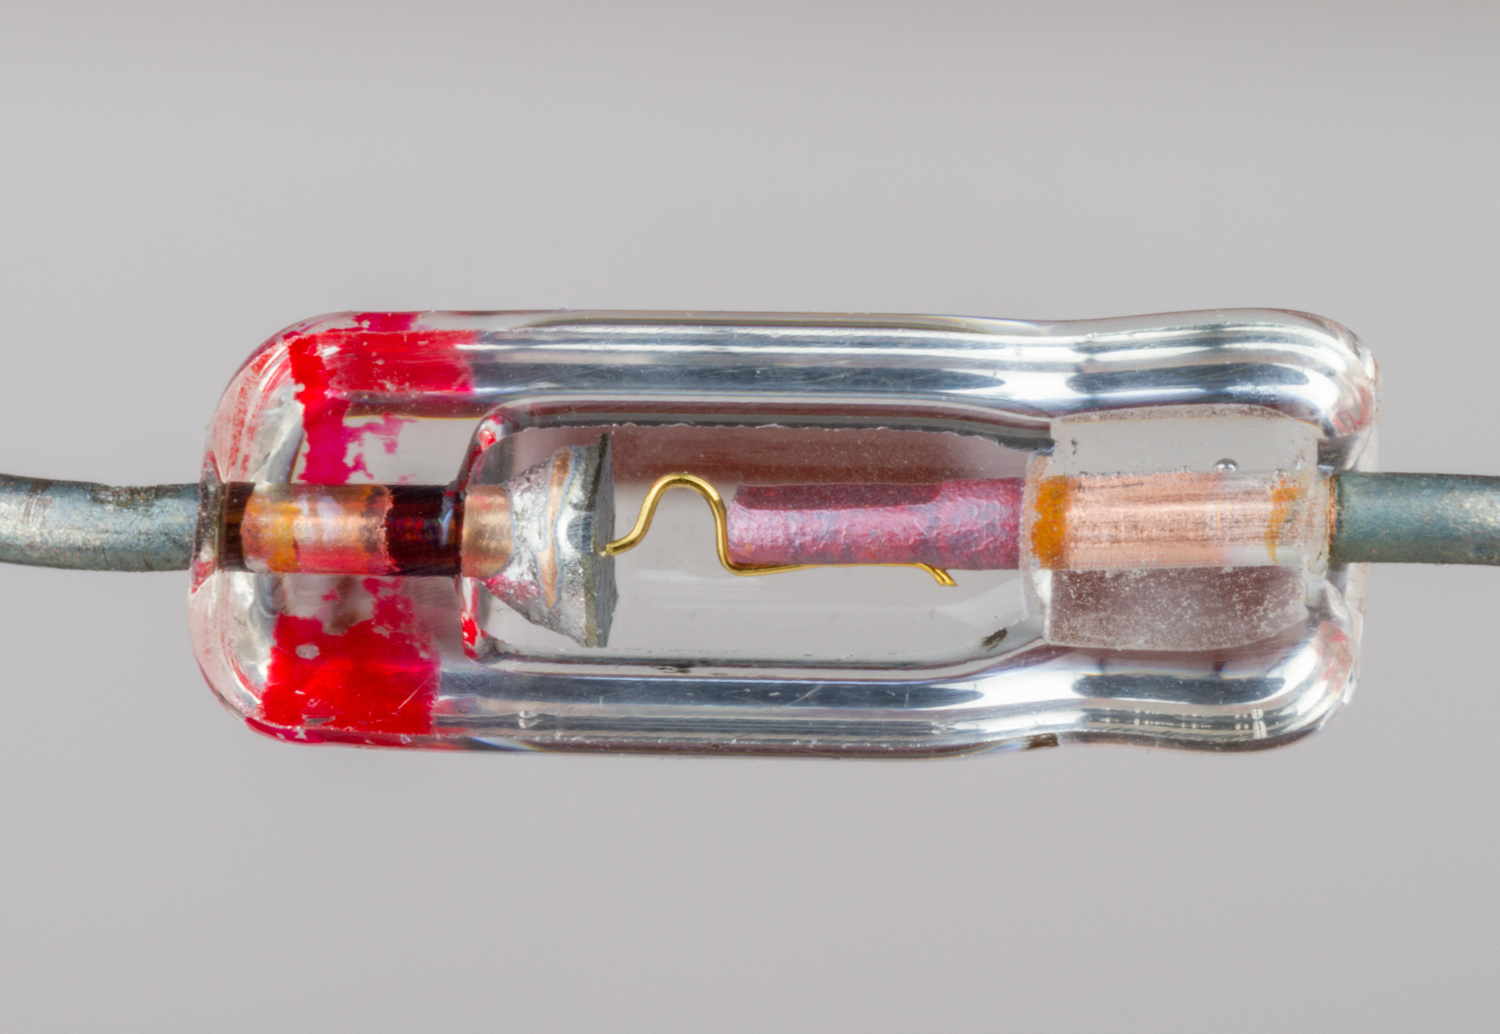 A closeup of a germanium 'cat whisker' diode, as one might find in a crystal radio. It is a clear glass horizontal tube, with splotches of red paint on the left hand side; in the center is a metal-colored cone touching a small copper-colored hook, which connects to a red stick